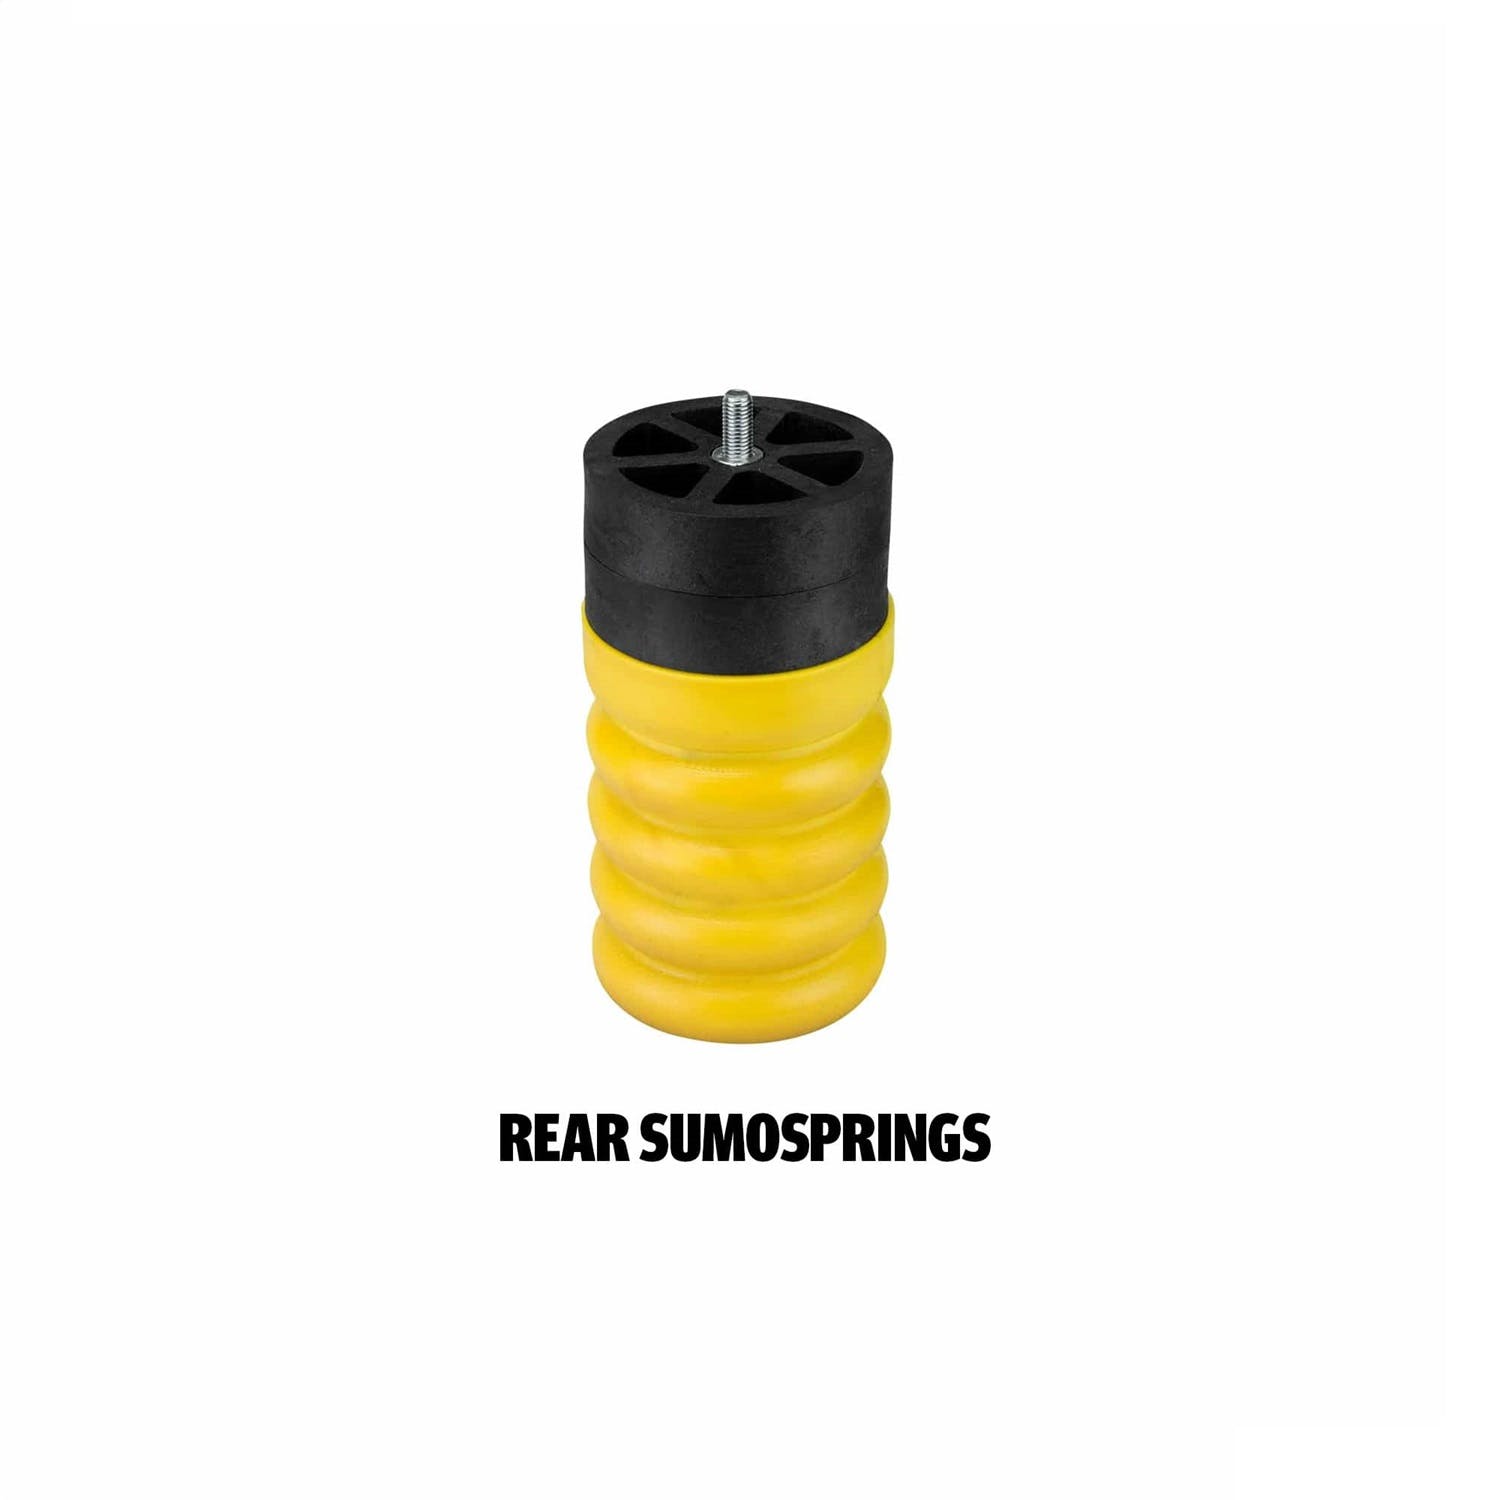 SuperSprings K-30-009 SumoSprings Front and Rear Kits are one-piece units attached on each side